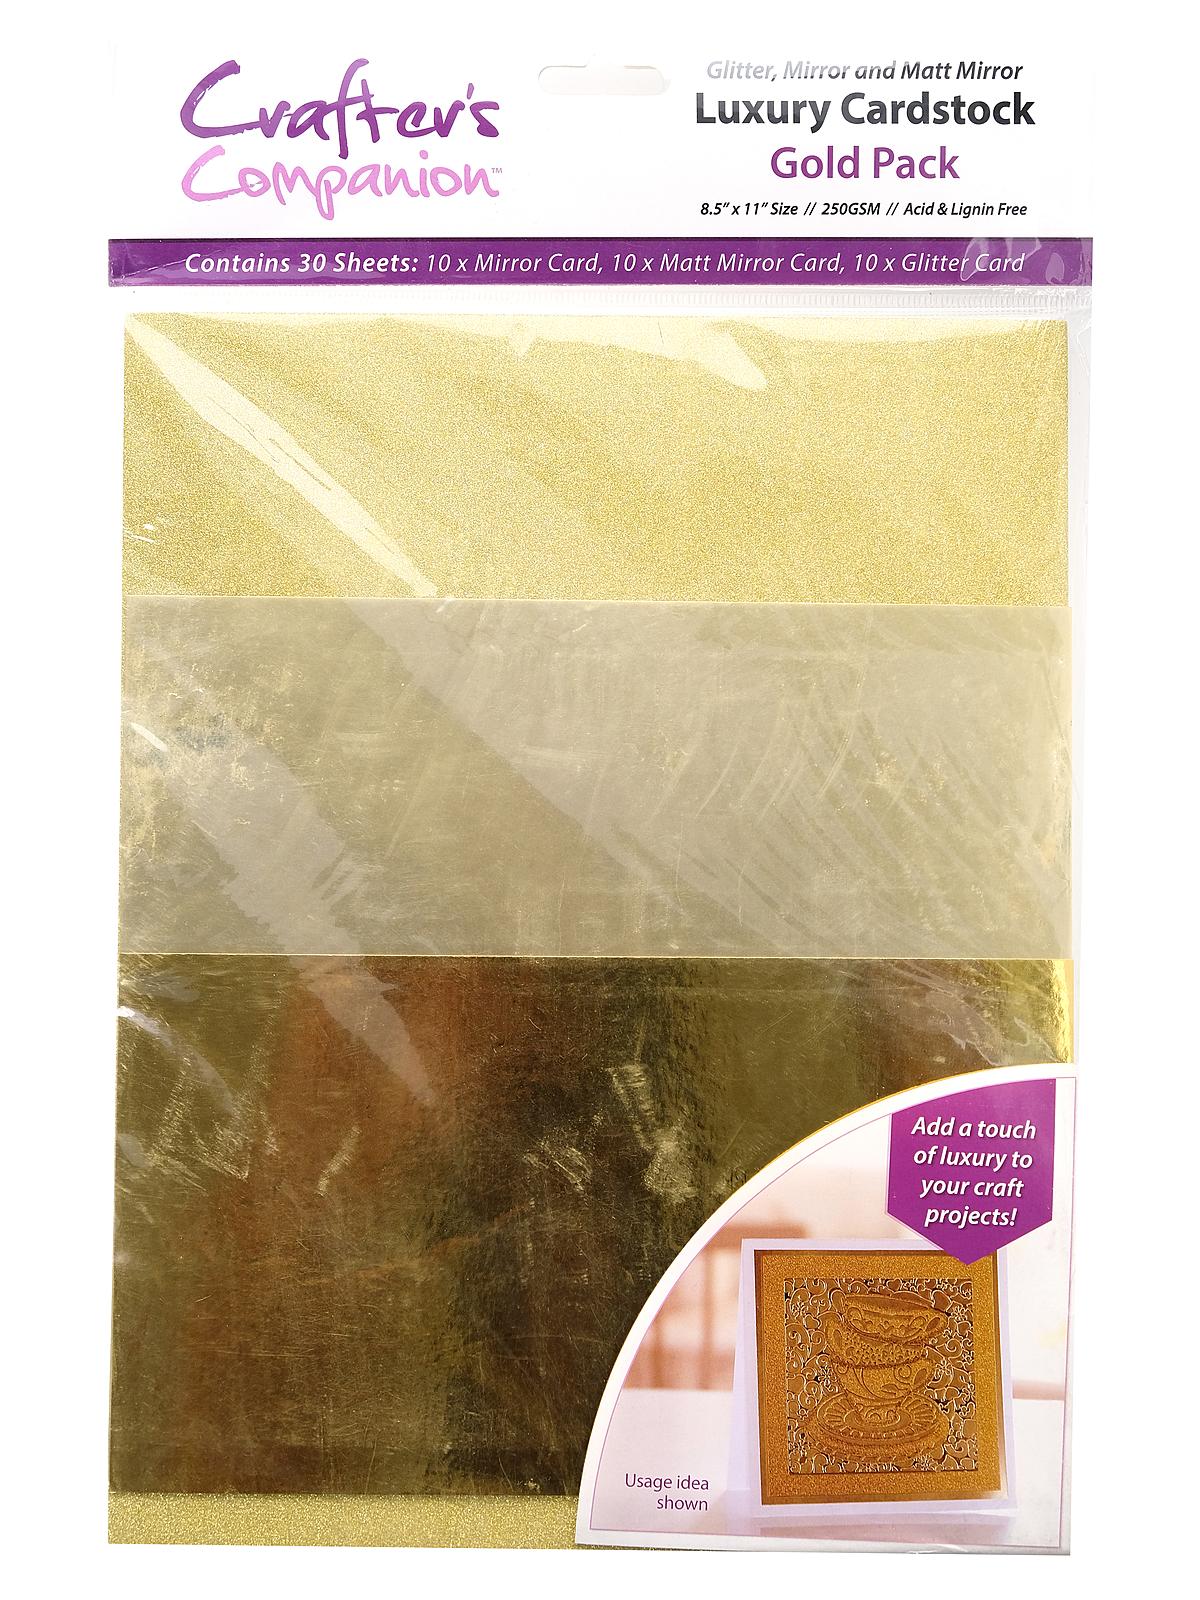 Luxury Cardstock Gold 8 1 2 In. X 11 In. Pack Of 30 Sheets